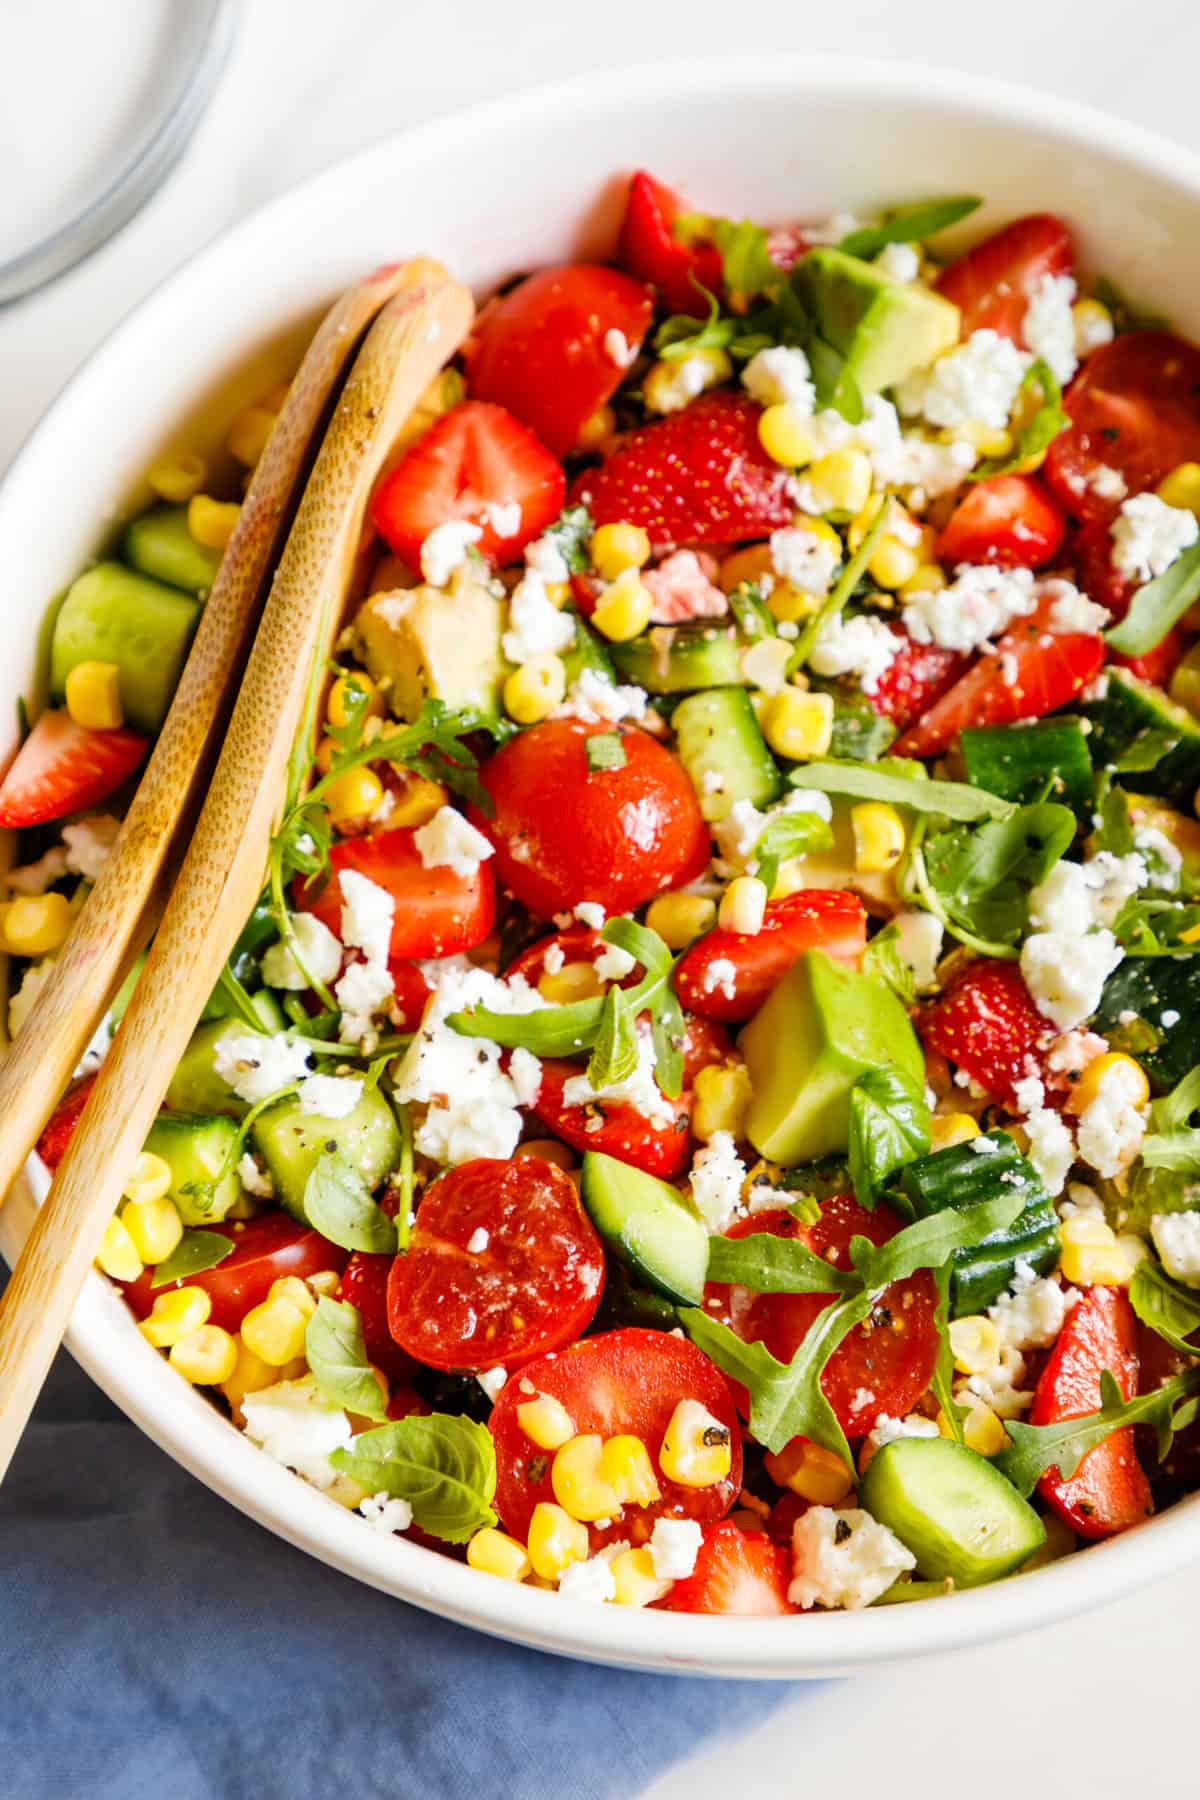 close up image of a large bowl of summer salad with wooden salad mixing utensils